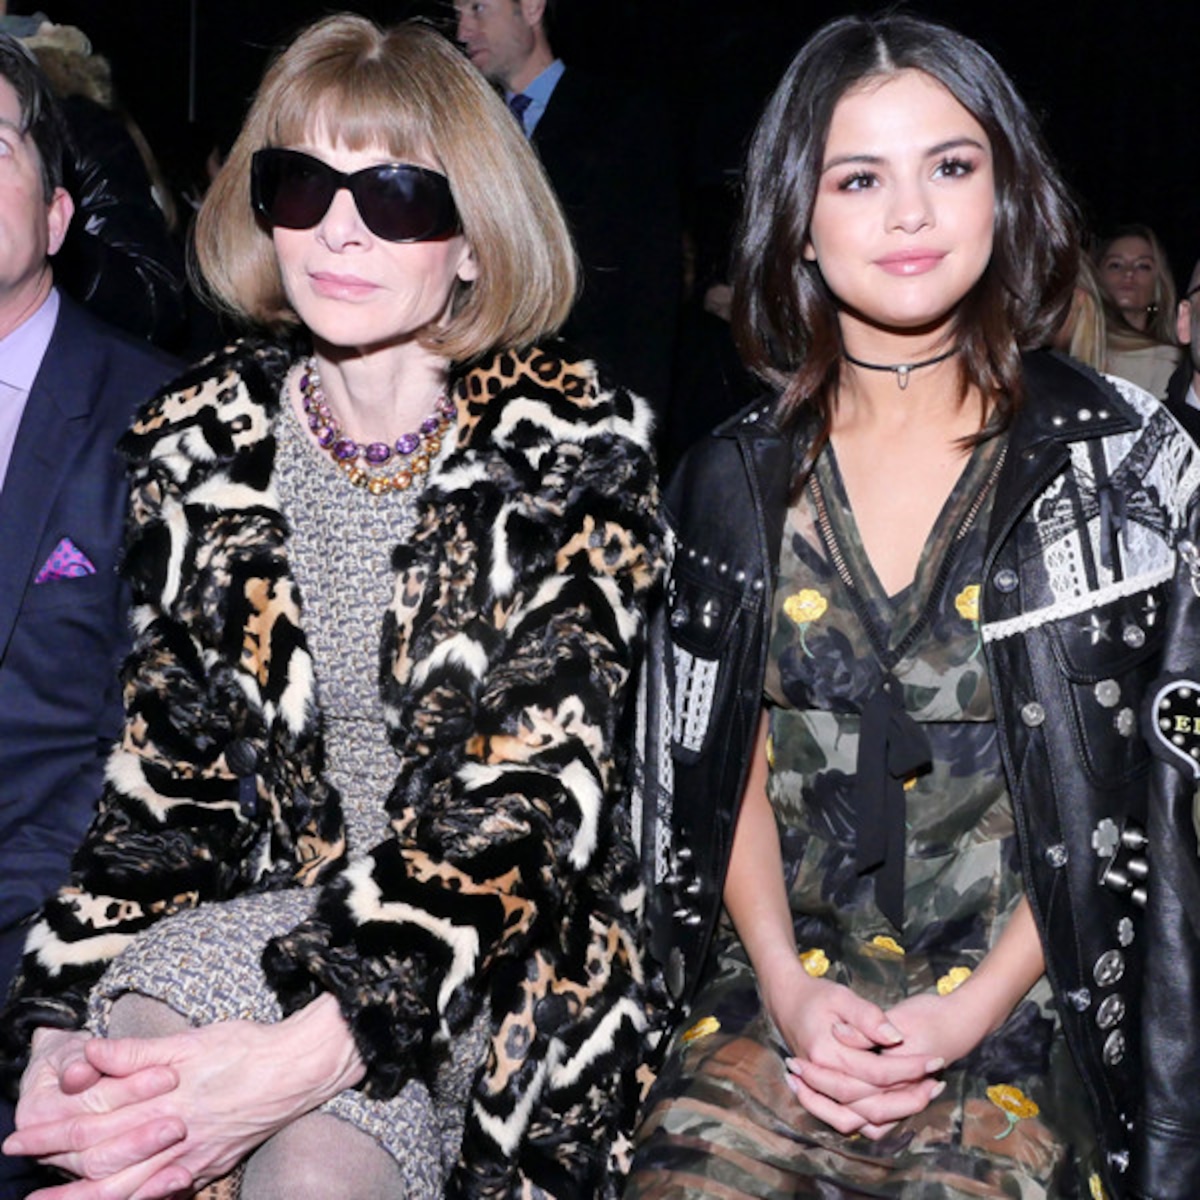 You Can Own a Pair of Anna Wintour's Signature Chanel Sunglasses!